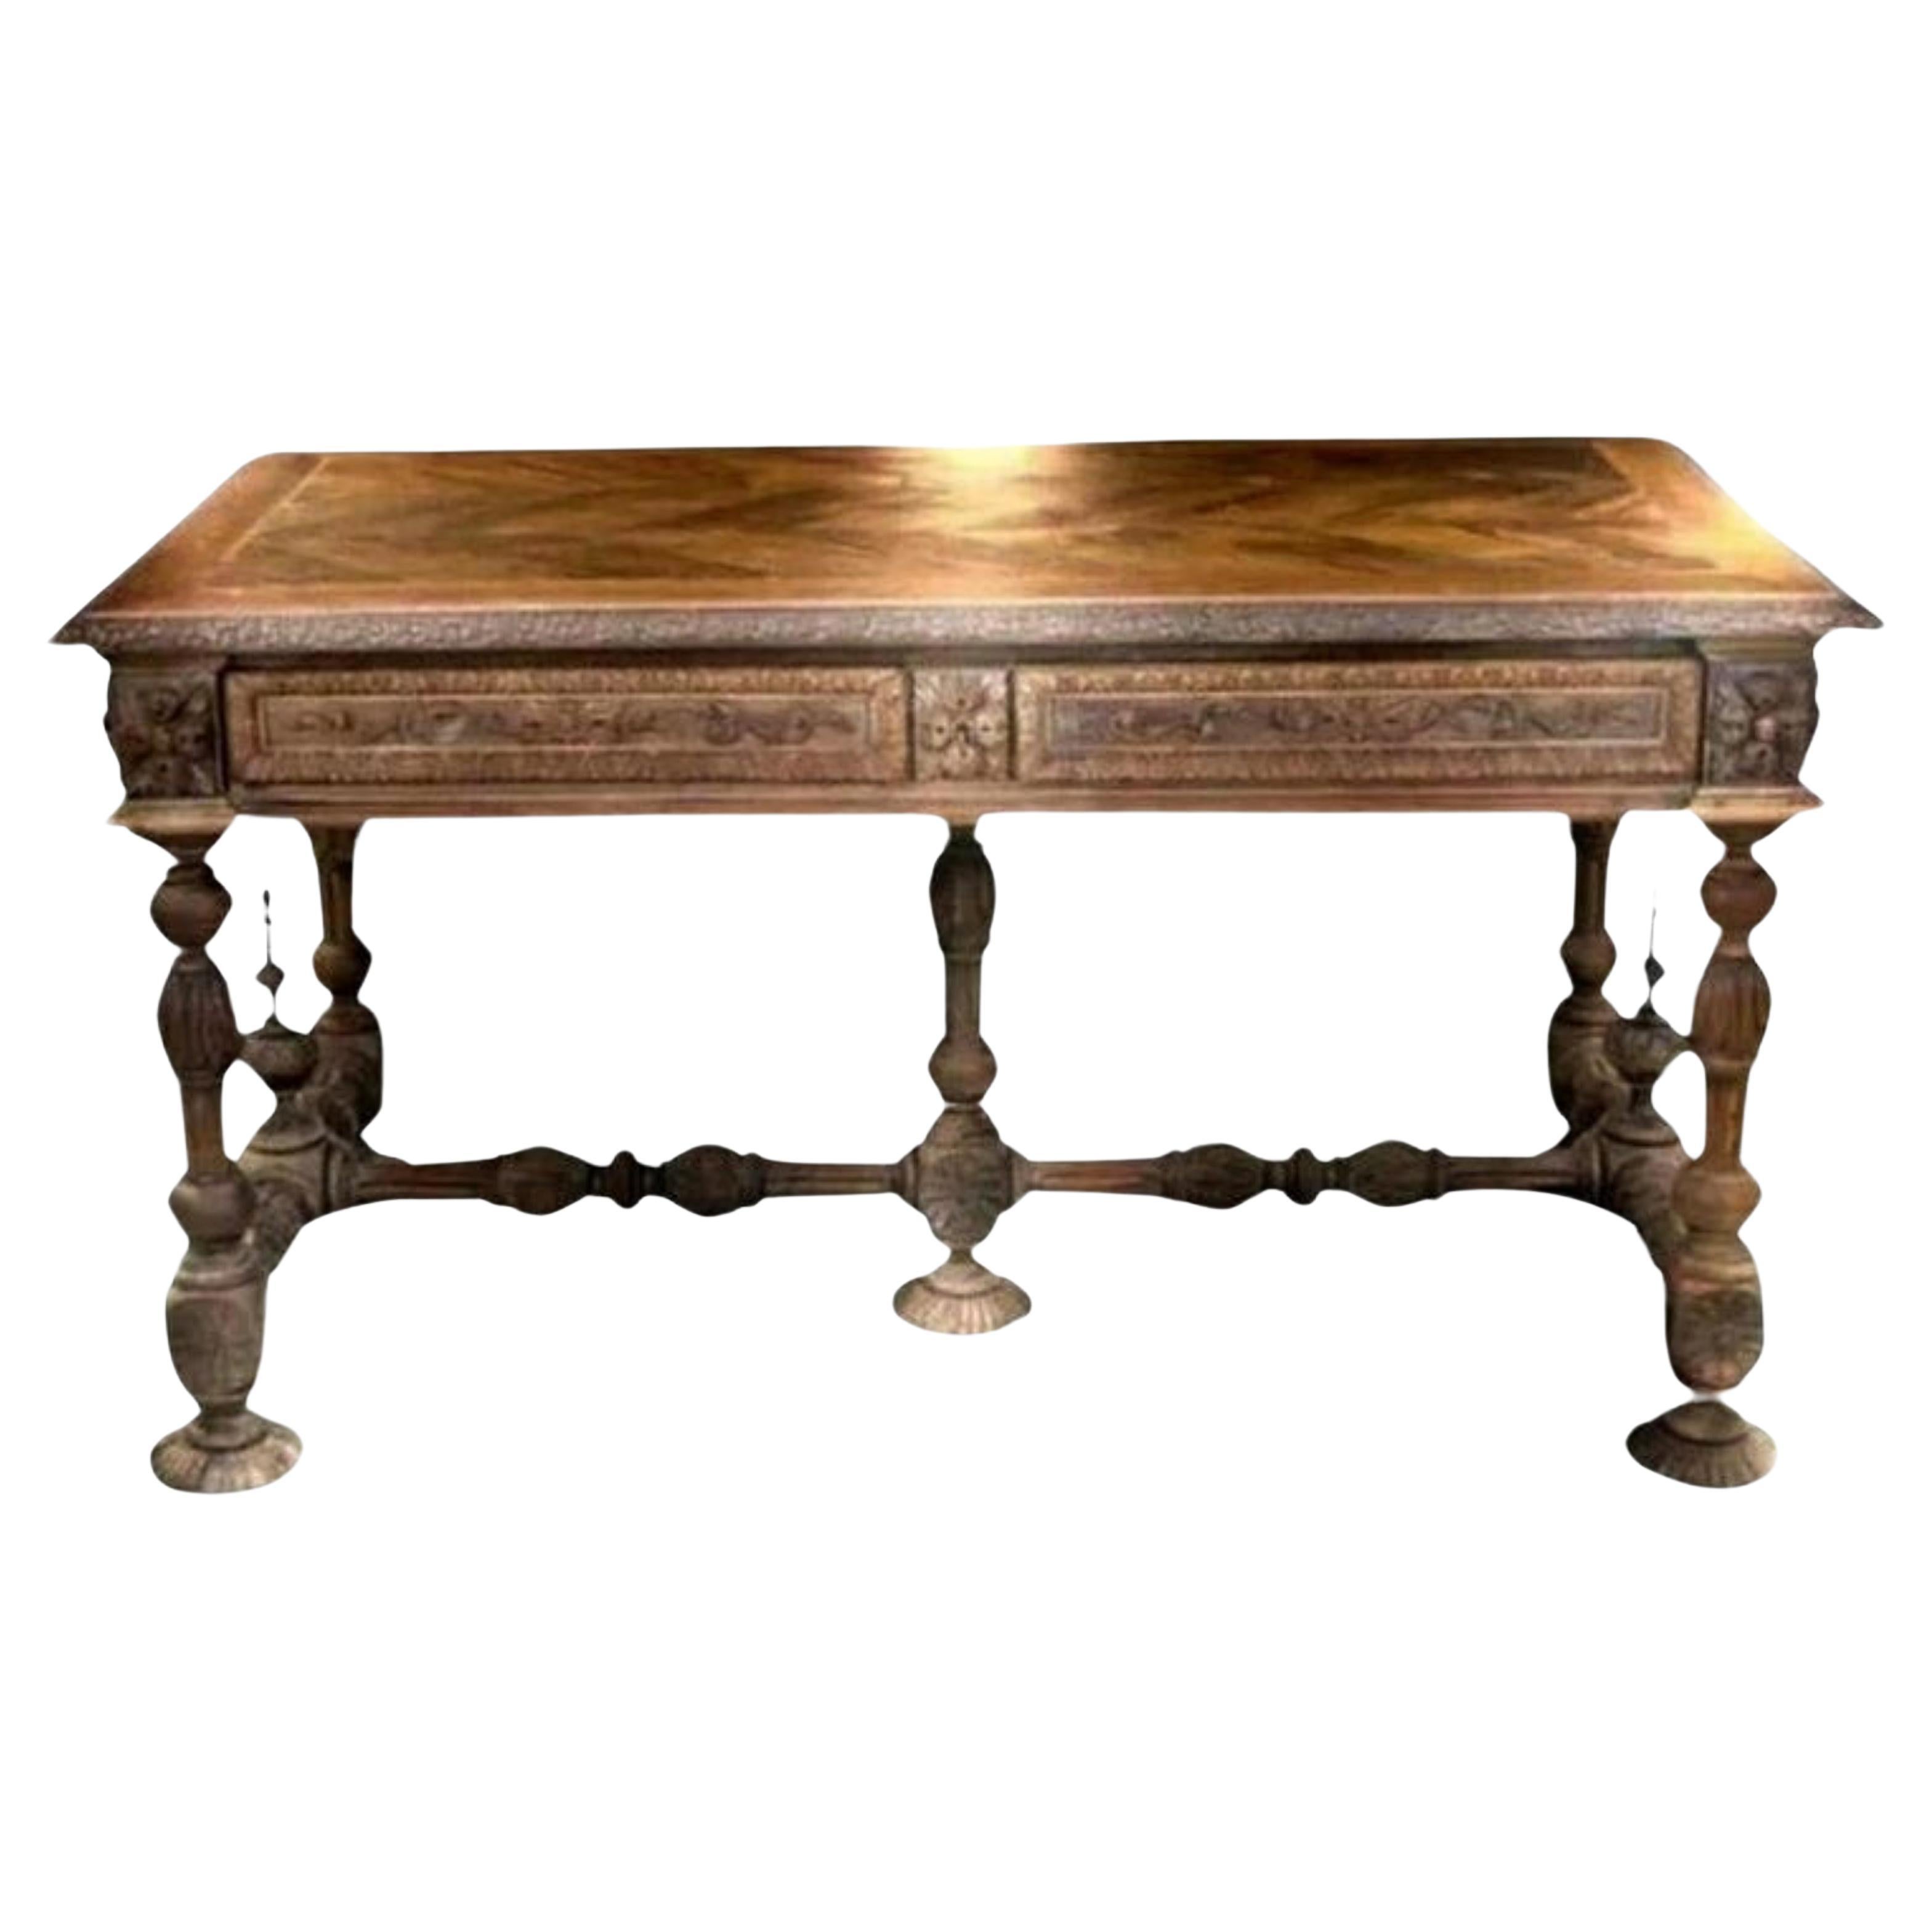 Italian Wood Table 19th Cent. Renaissance Style For Sale